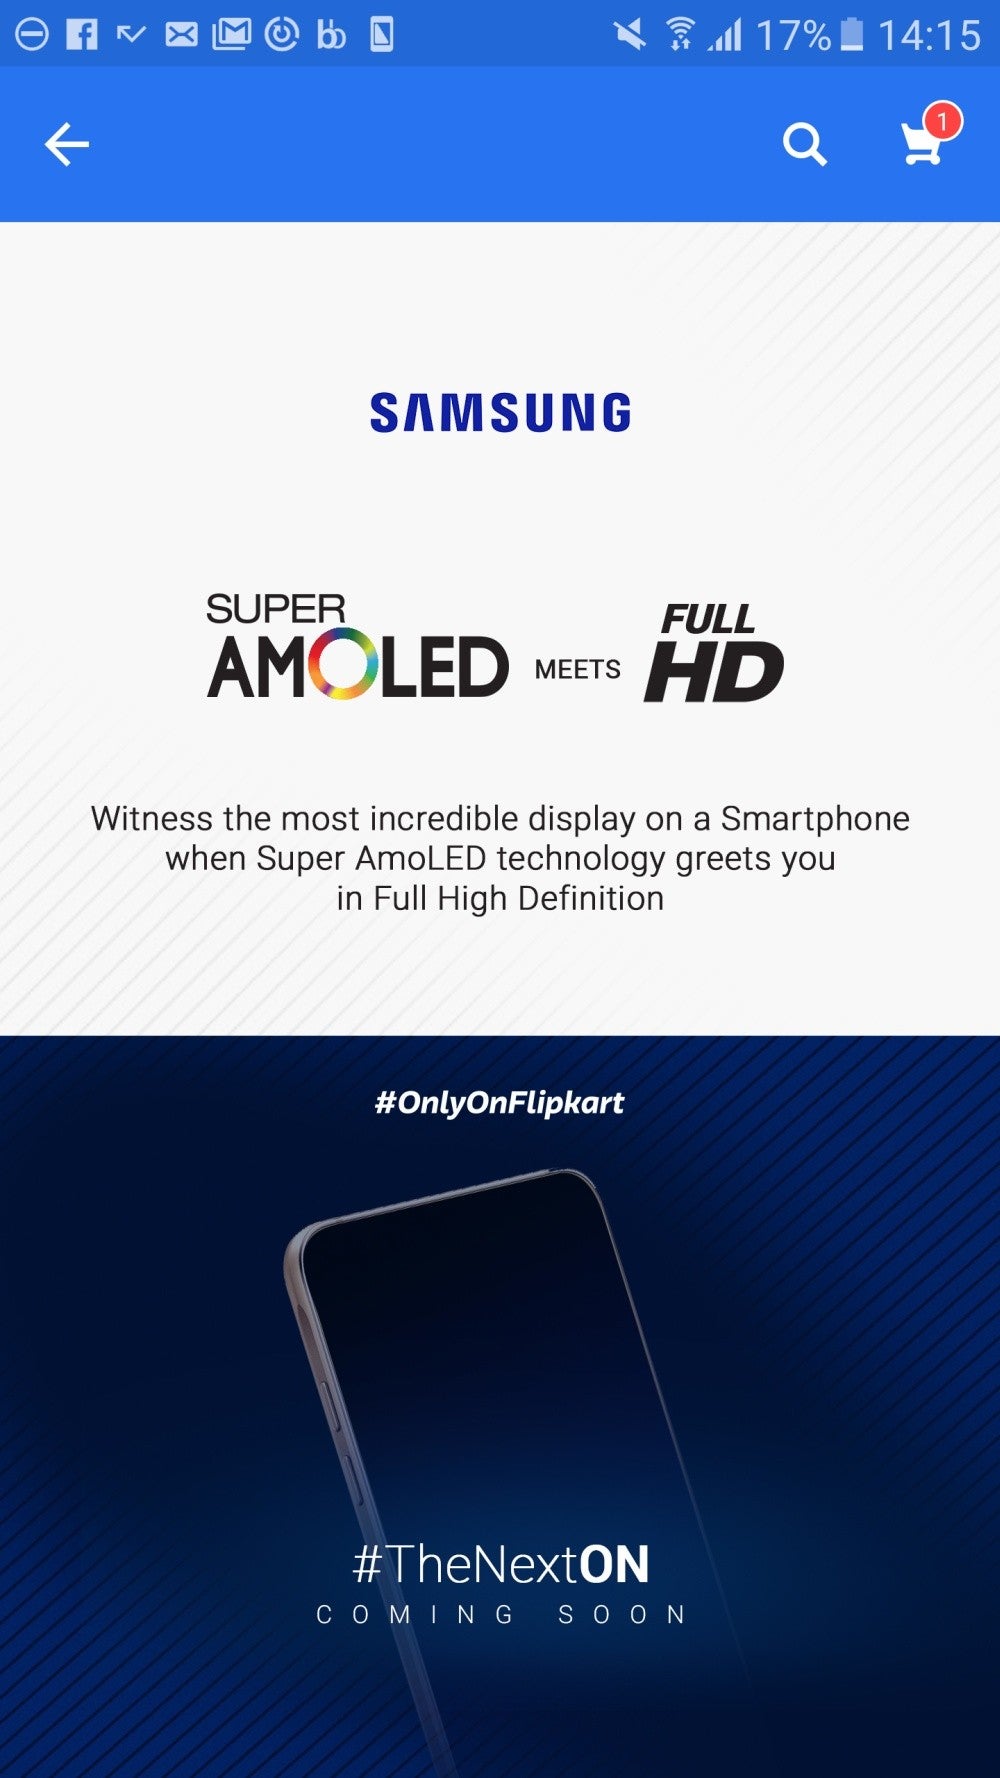 Samsung Galaxy On8 gets teased with Super AMOLED display